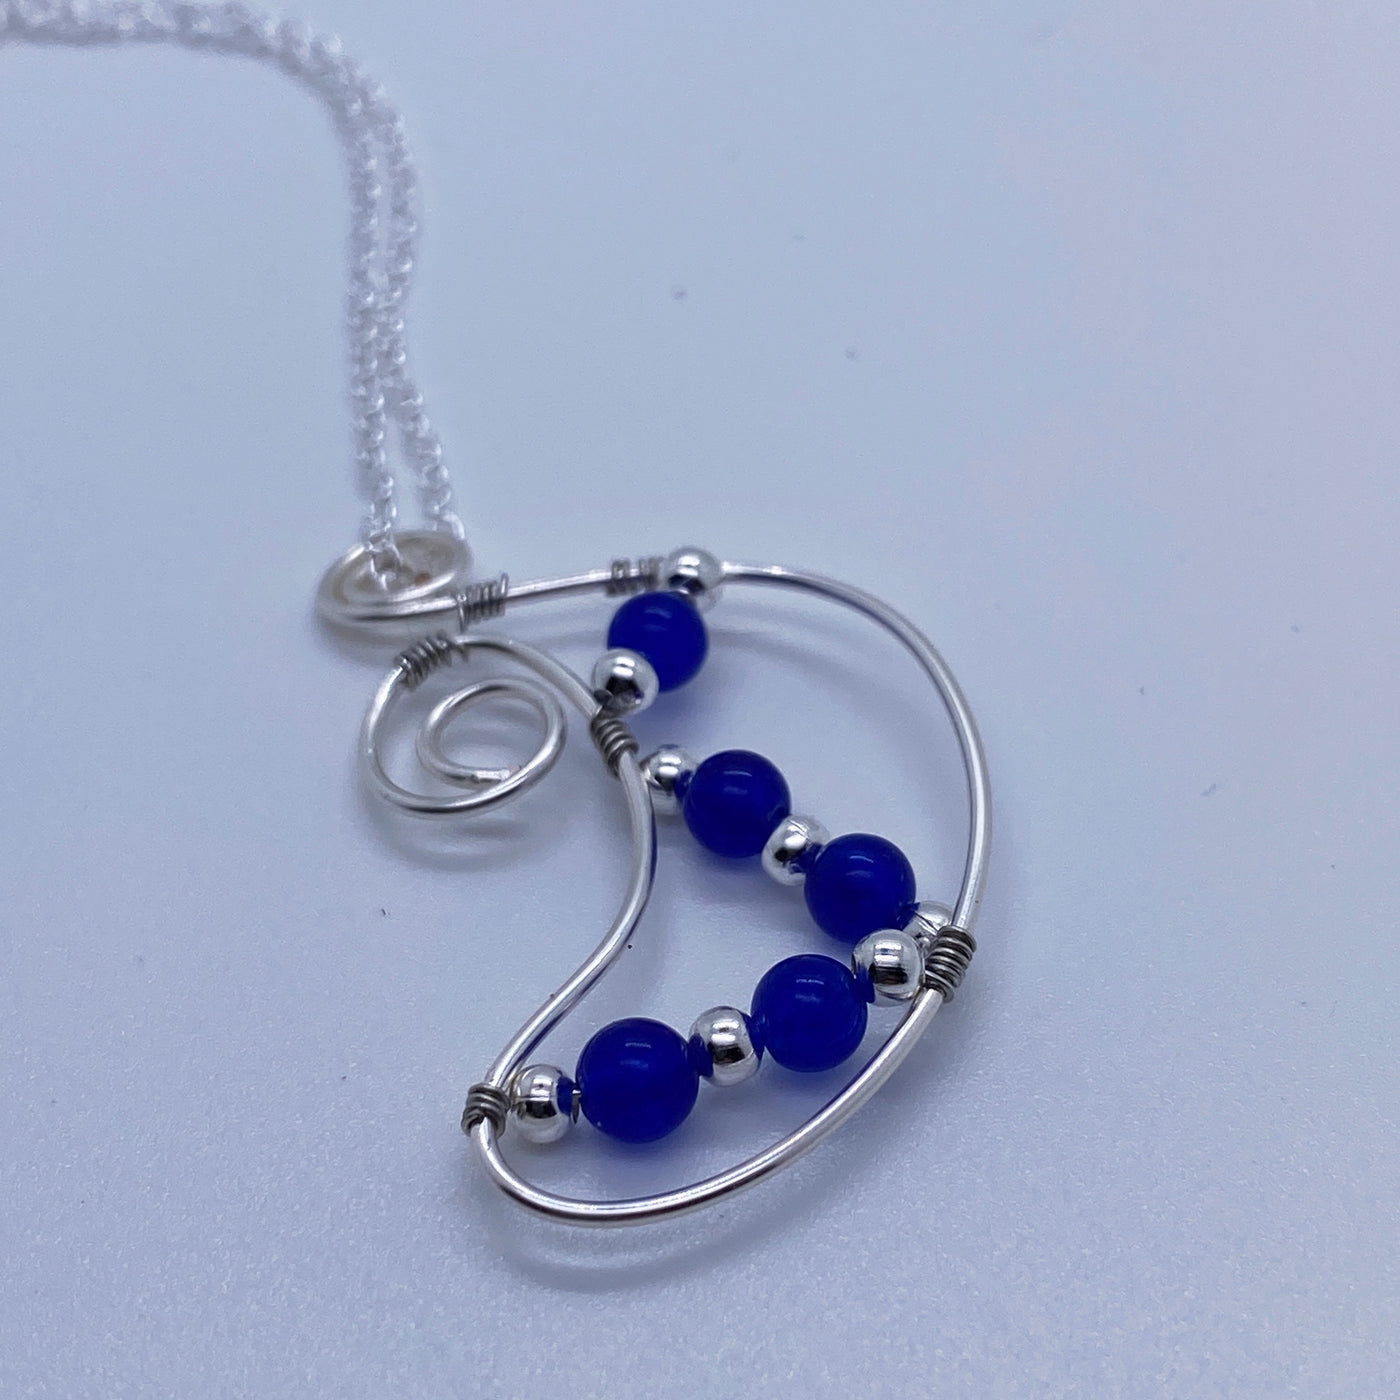 Blue calcedony agate and silver pendant.